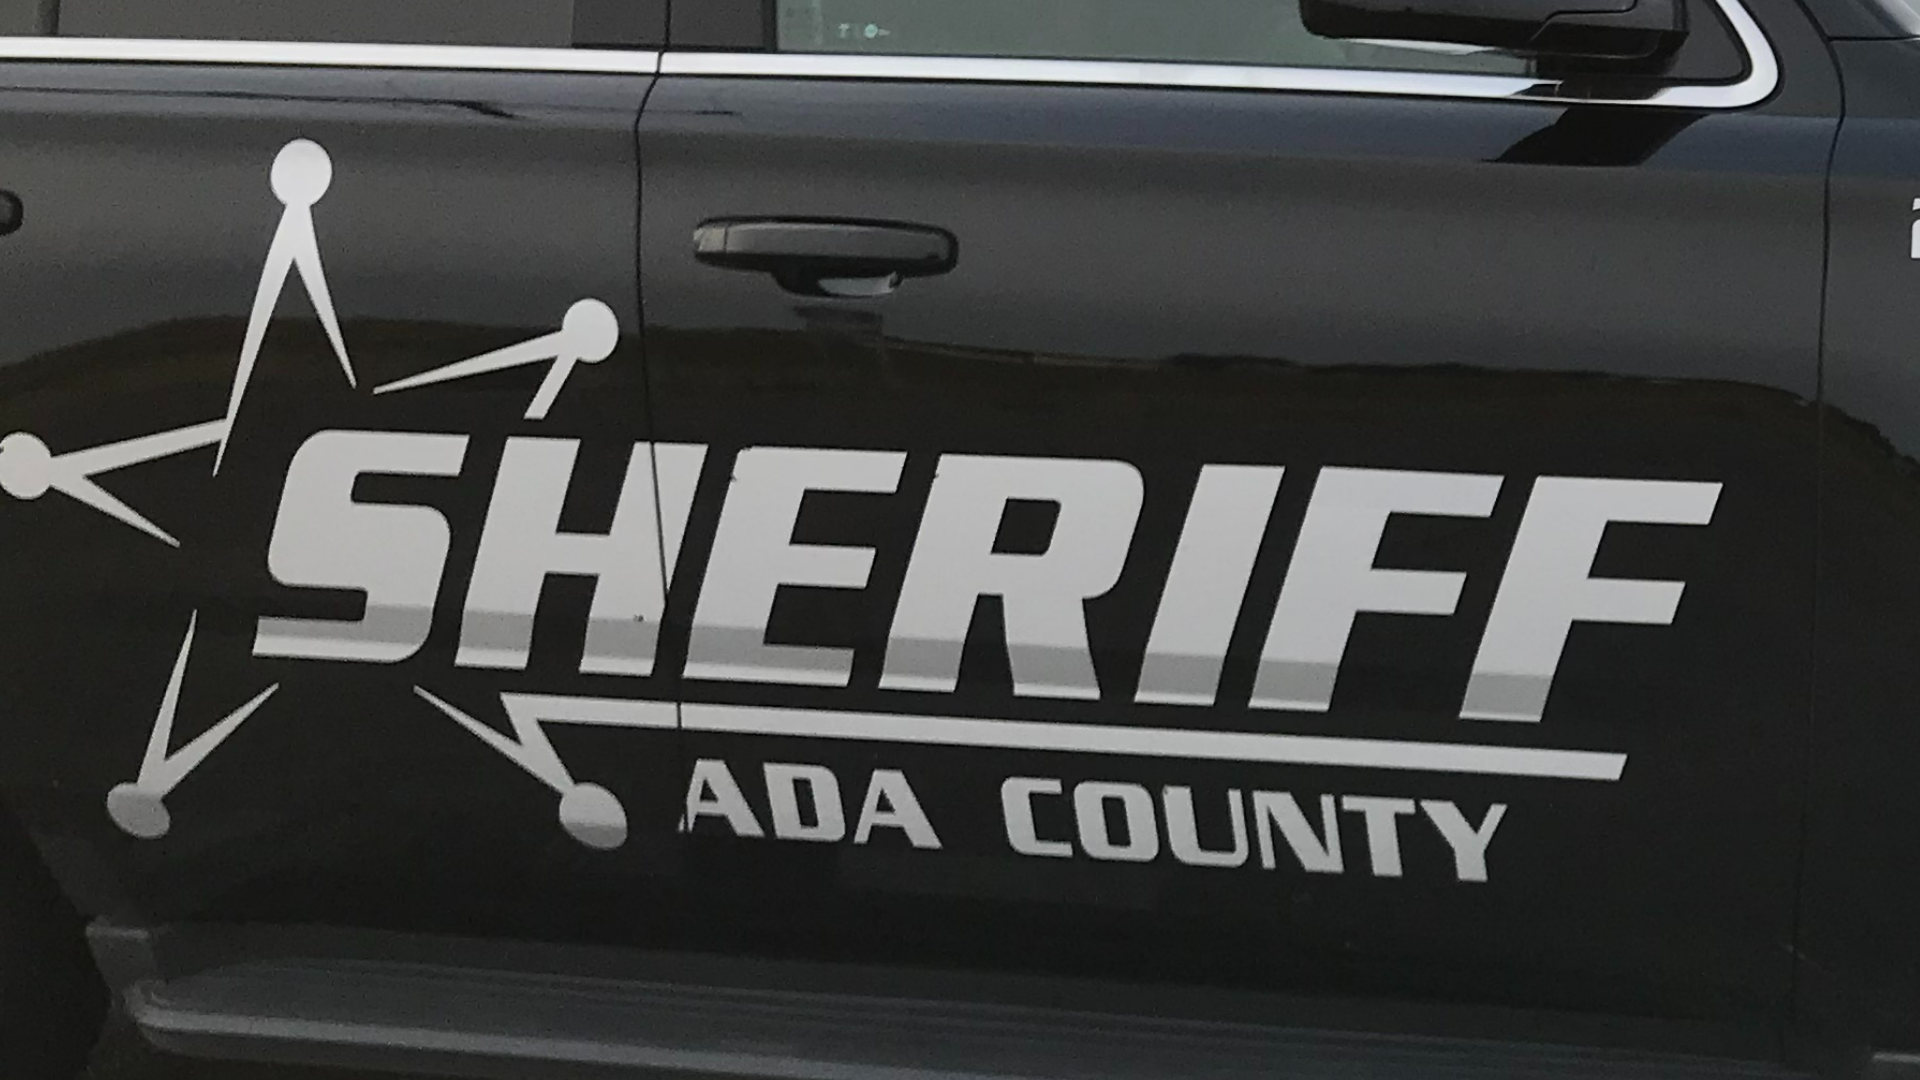 The man died after a motorcycle and cement truck collided head-on near the intersection of Linder and Amity on Friday, the Ada County Sheriff's Office said.